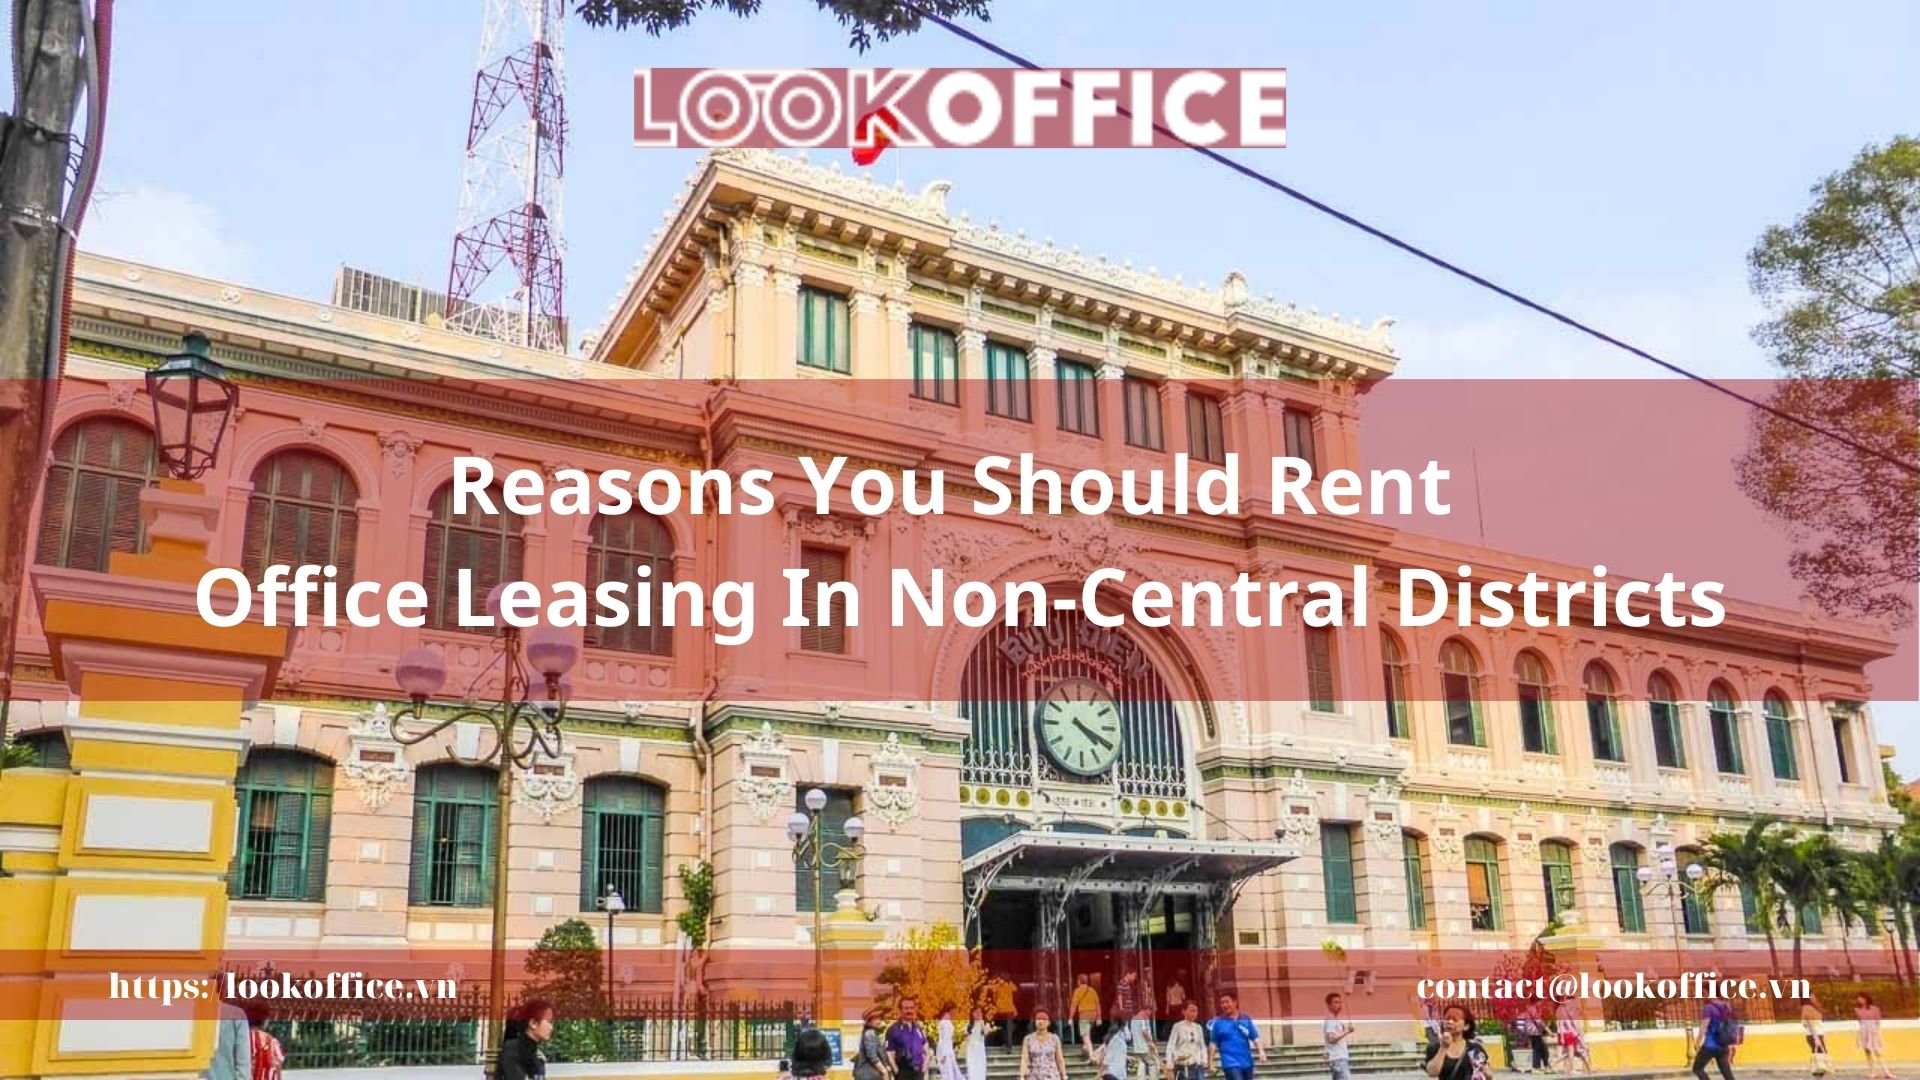 Reasons You Should Rent Office Leasing In Non-Central Districts